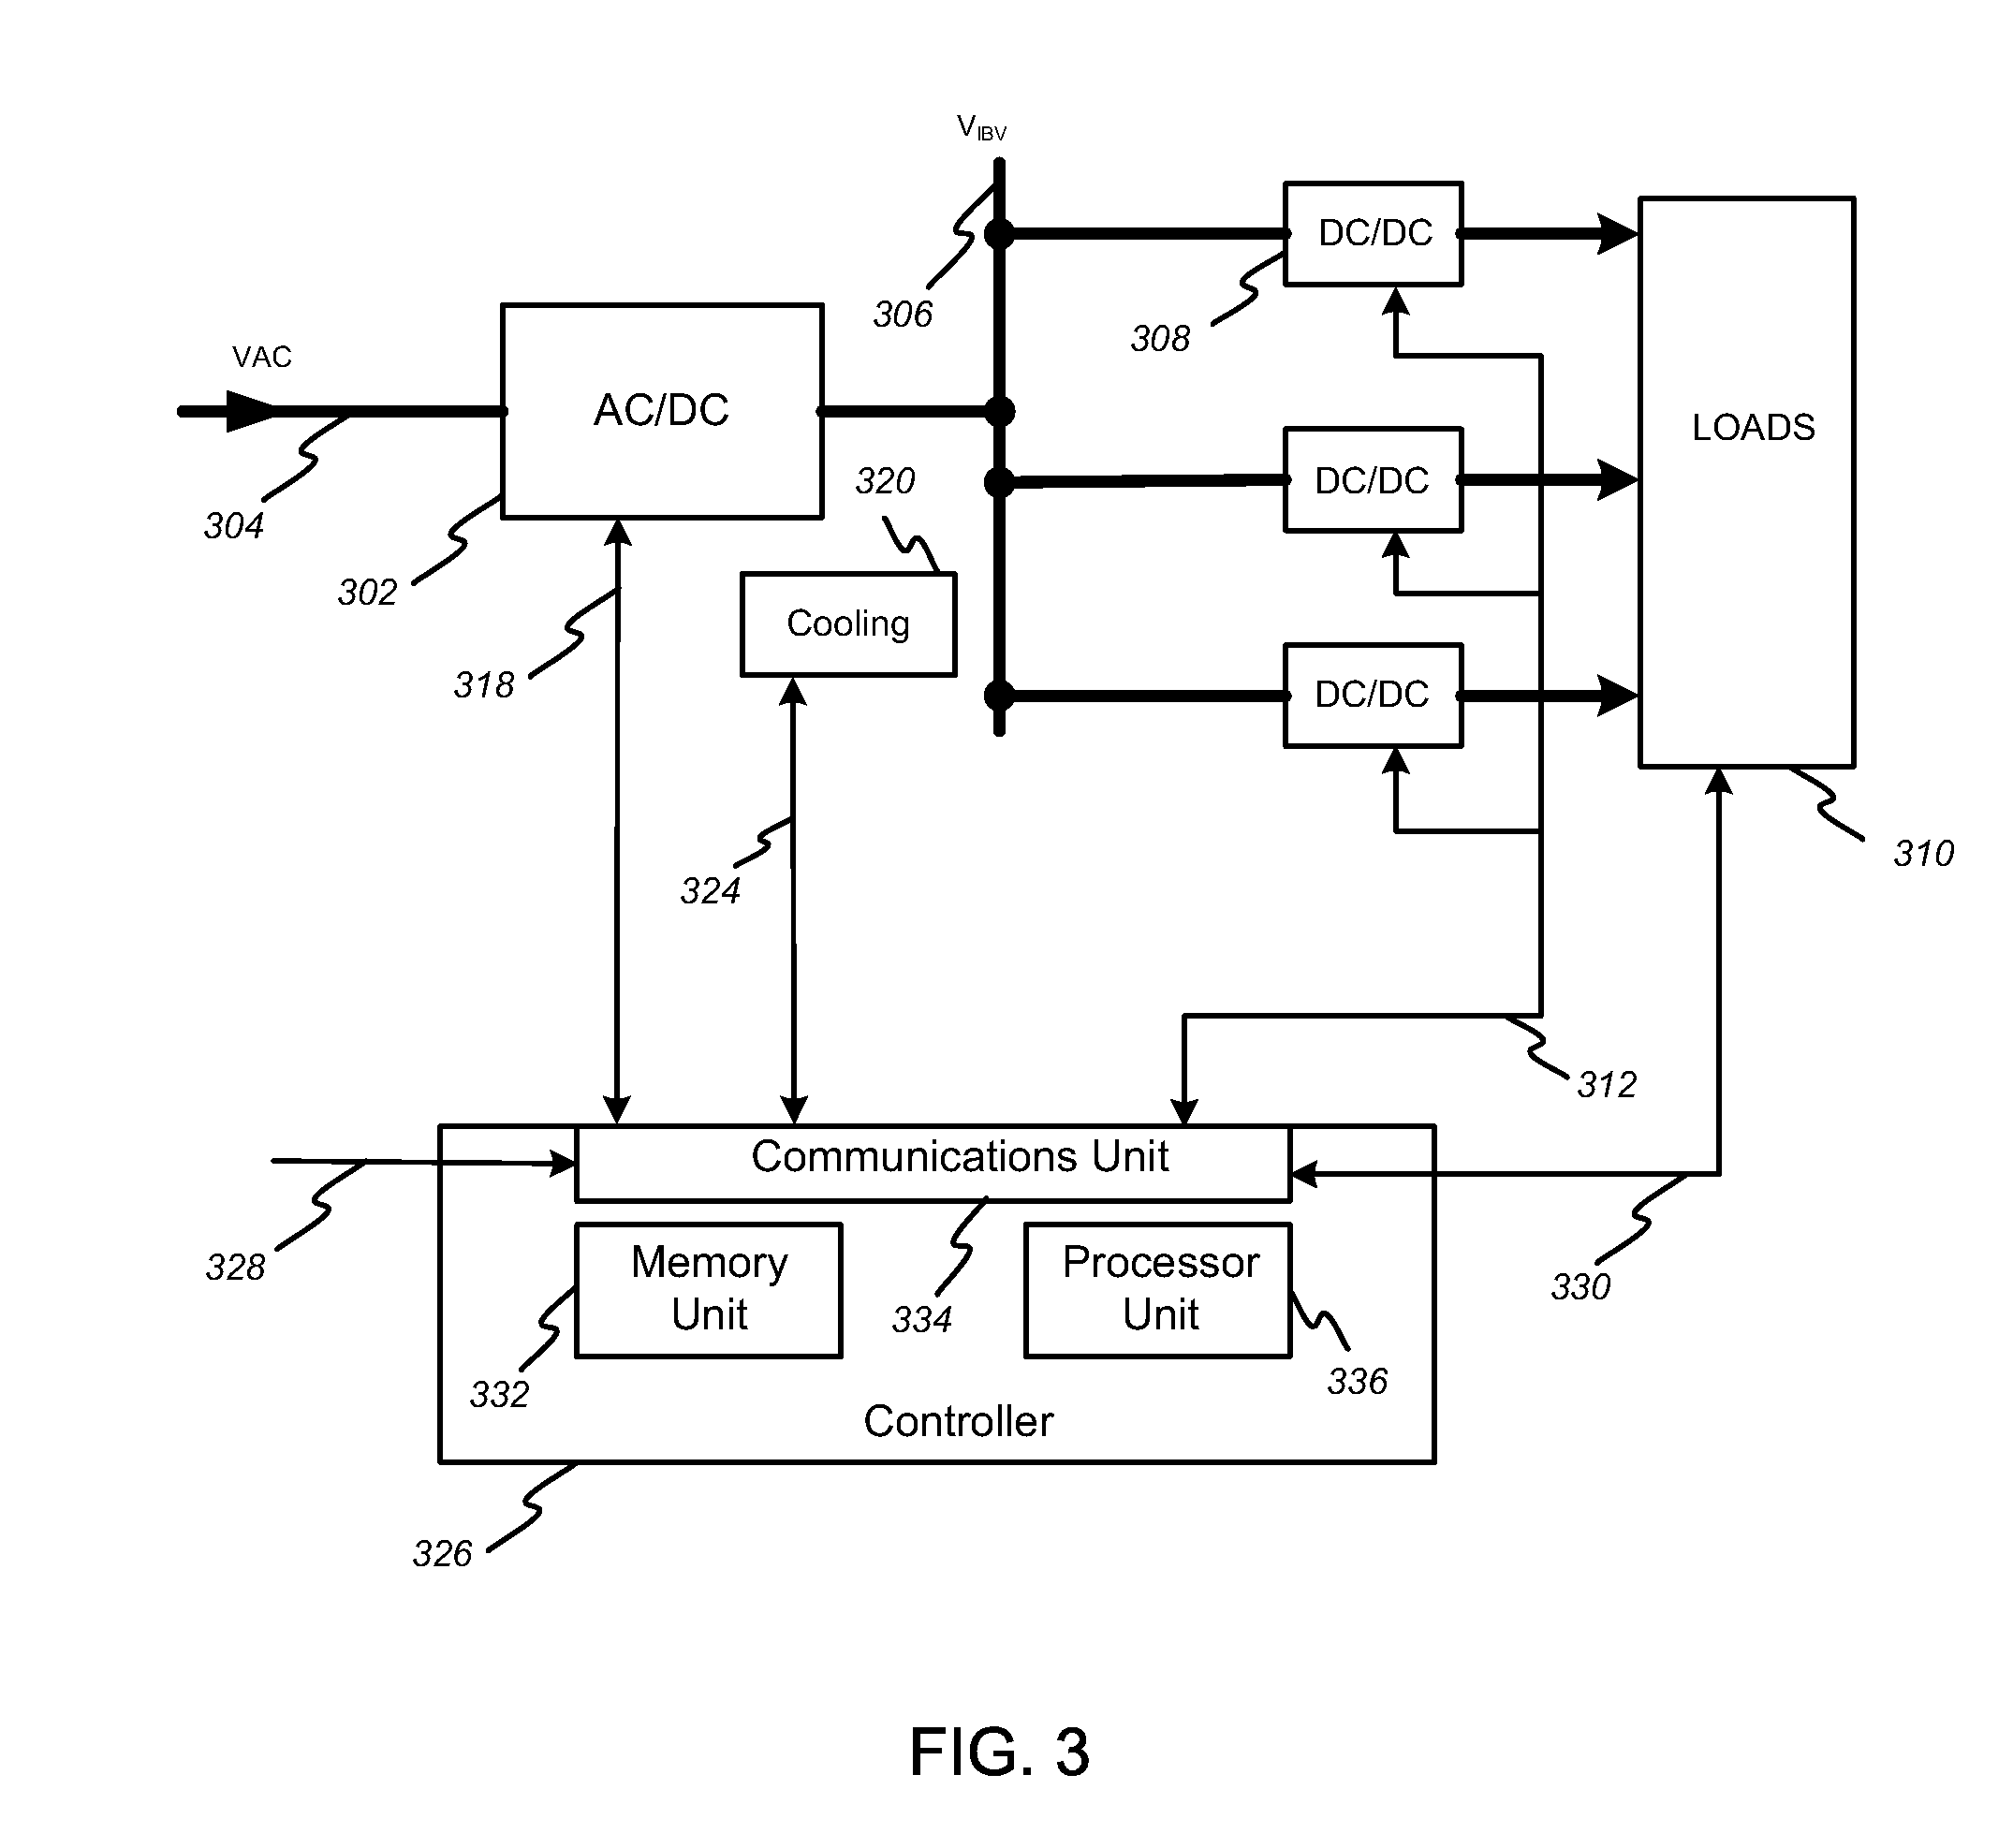 Apparatus and method of optimizing power system efficiency using a power loss model